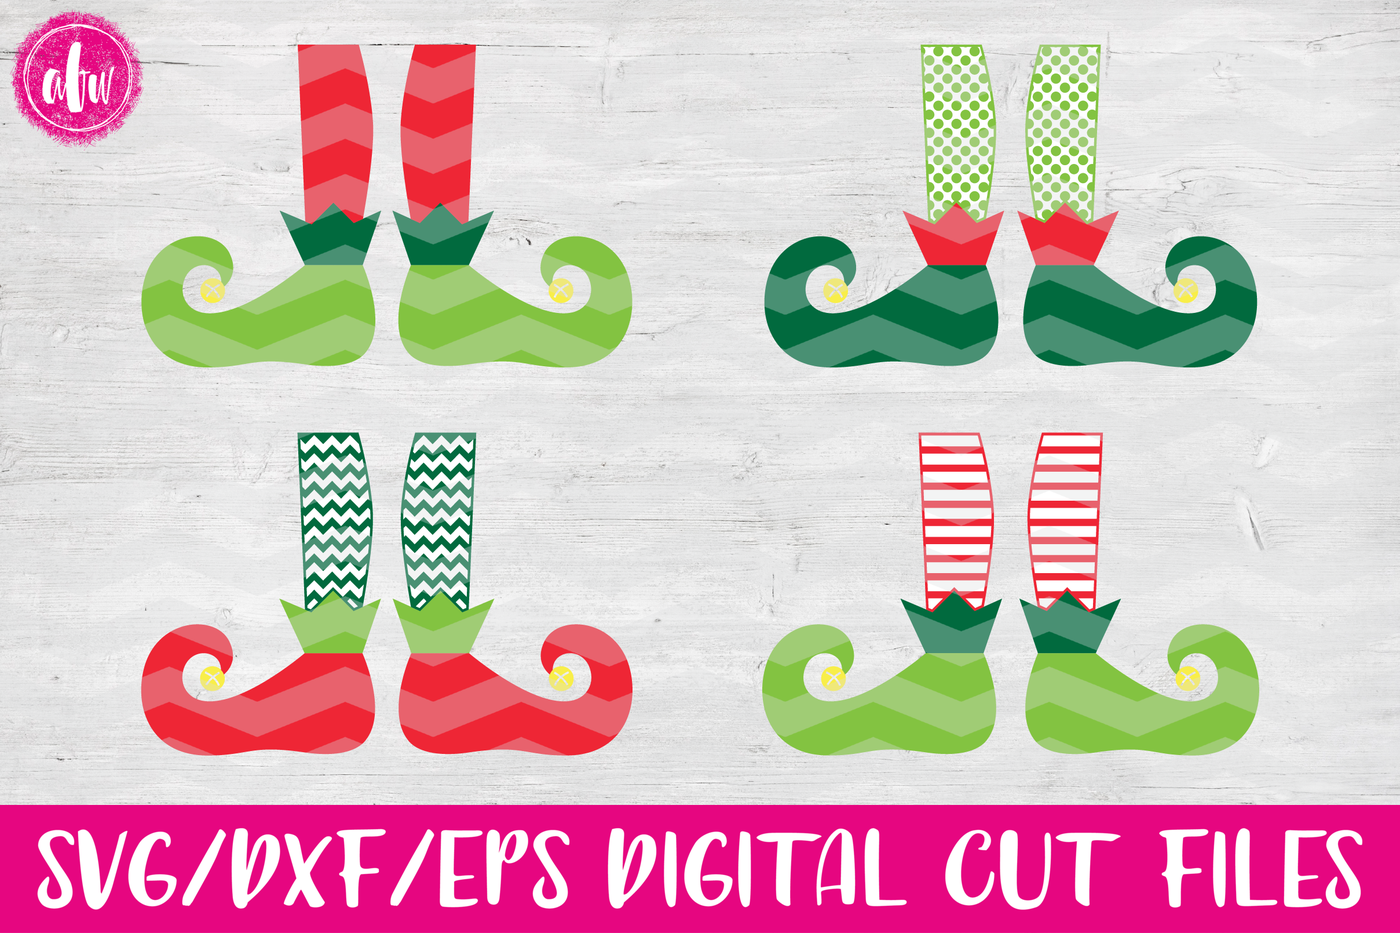 Download Elf Legs - SVG, DXF, EPS Cut Files By AFW Designs ...